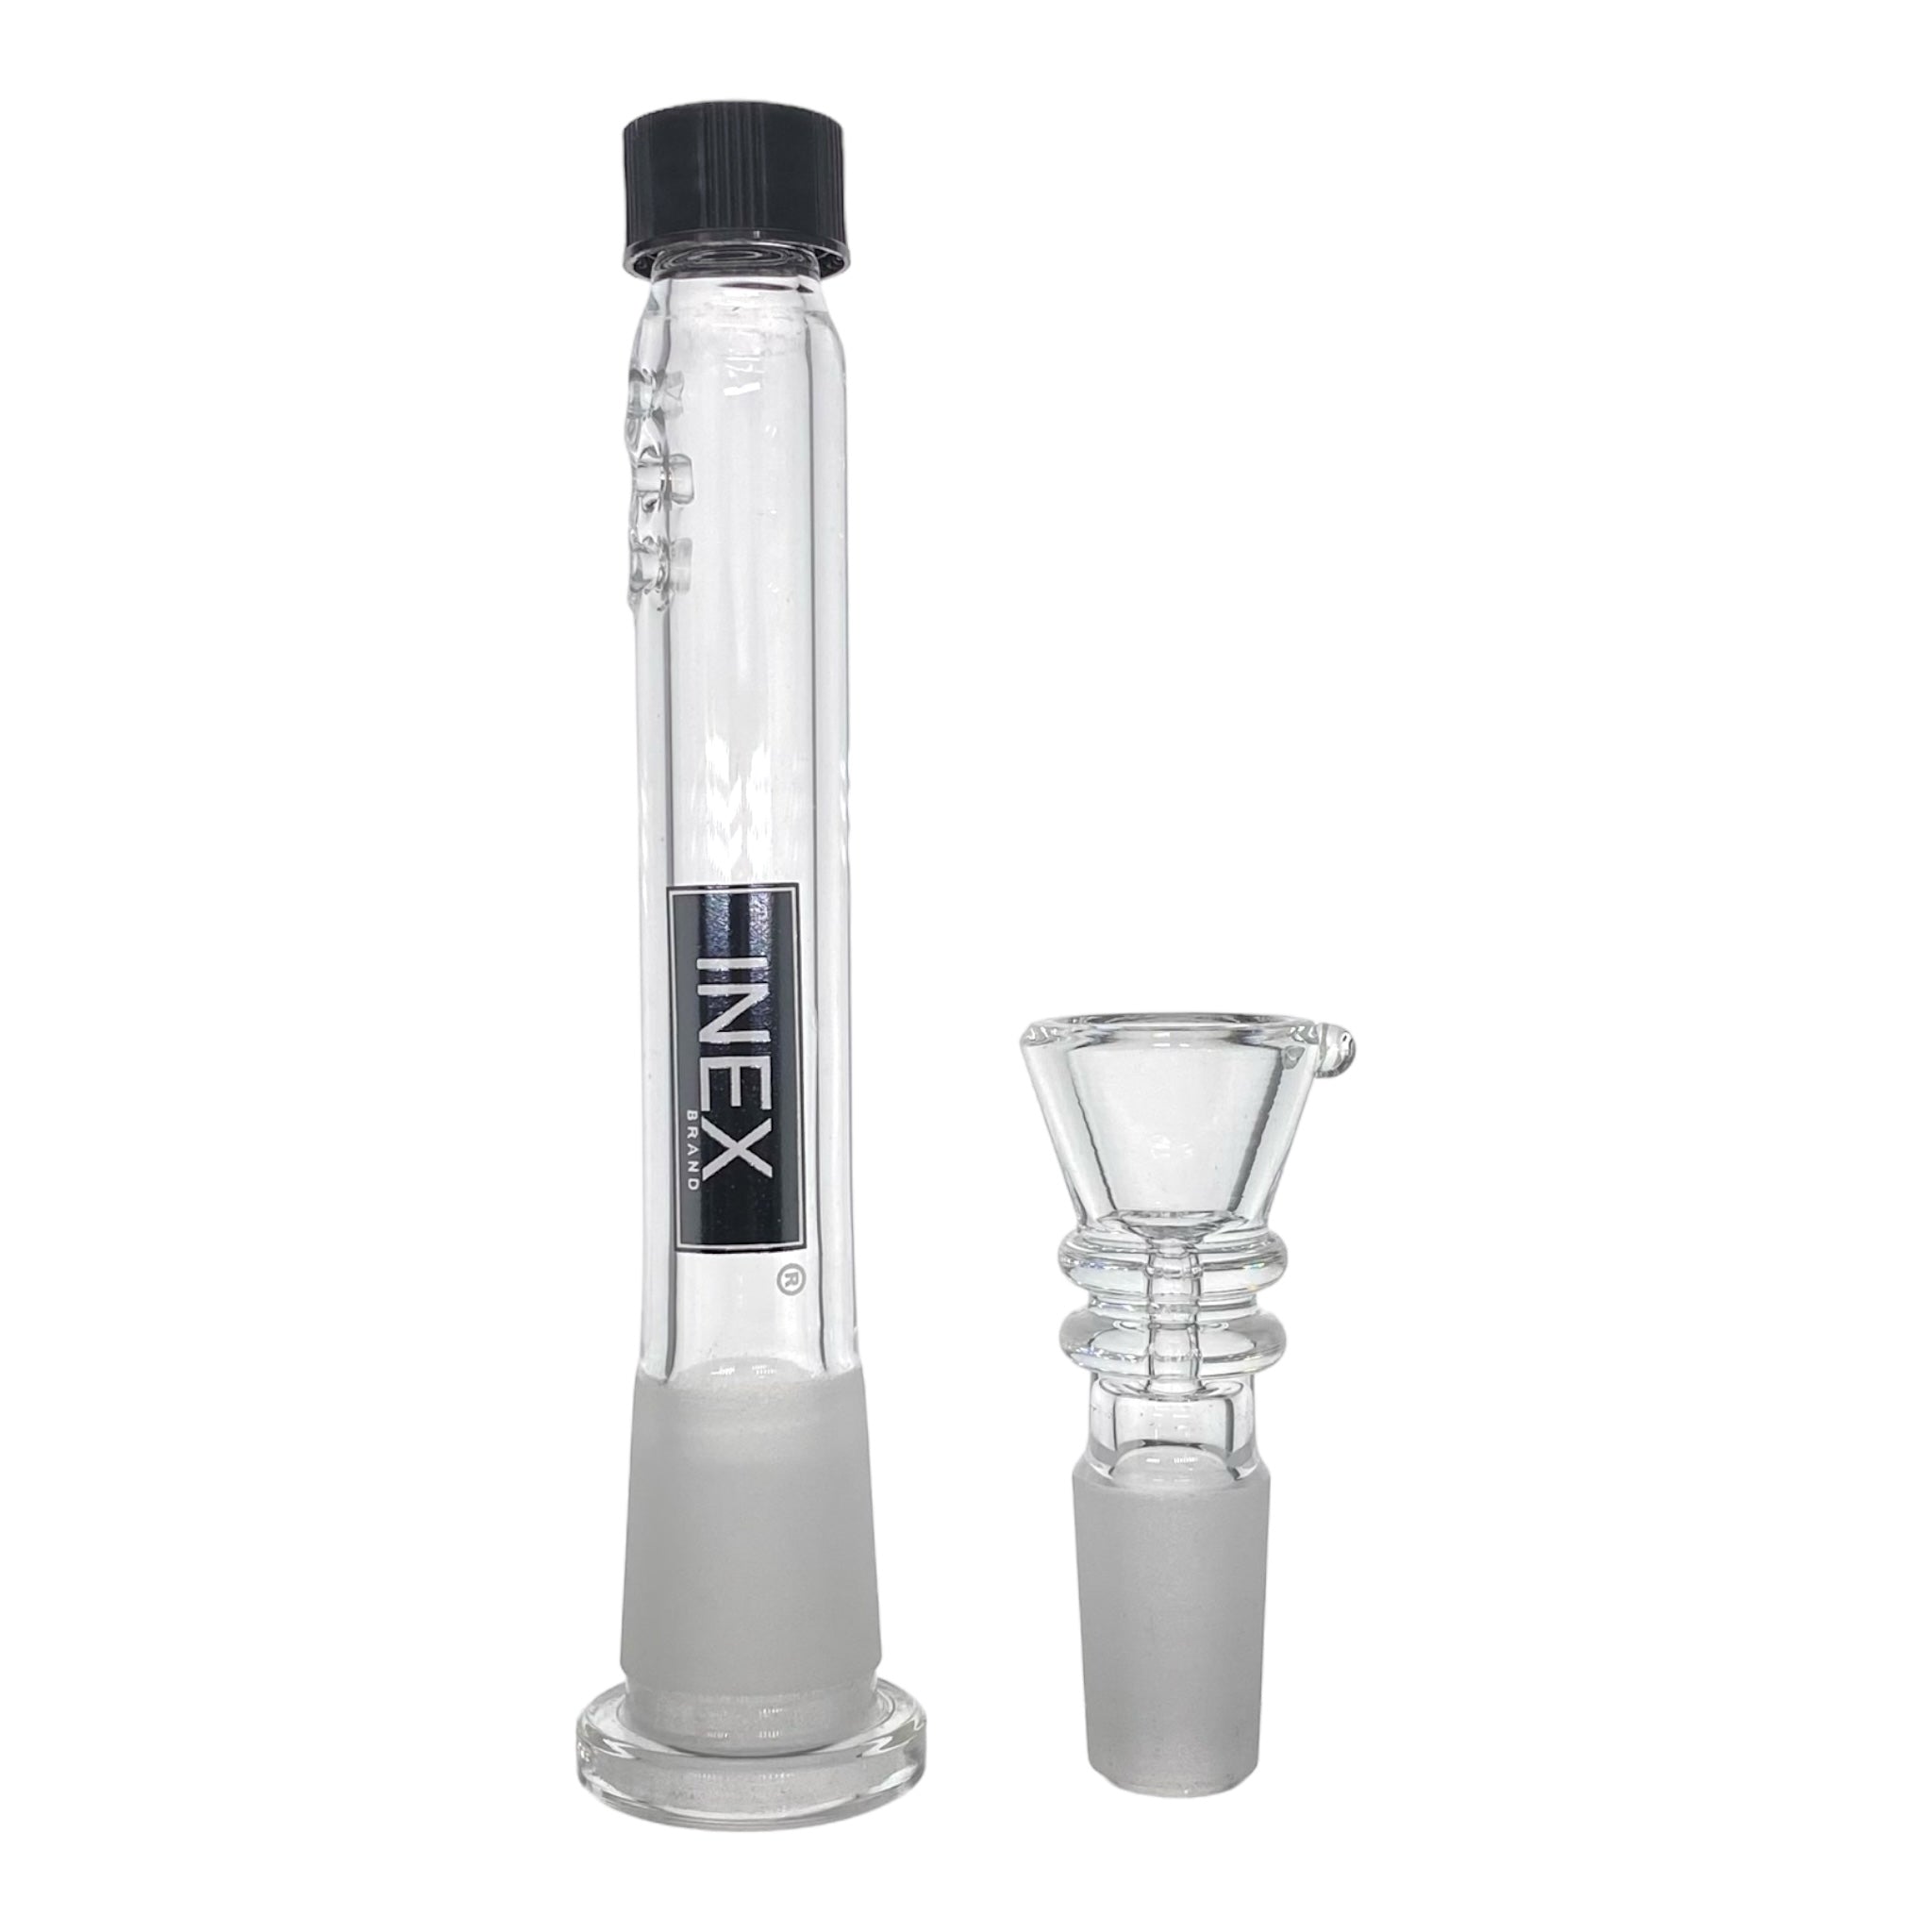 Inex Glass - Color Changing Fuming Beaker Glass Bong With Screw Caps